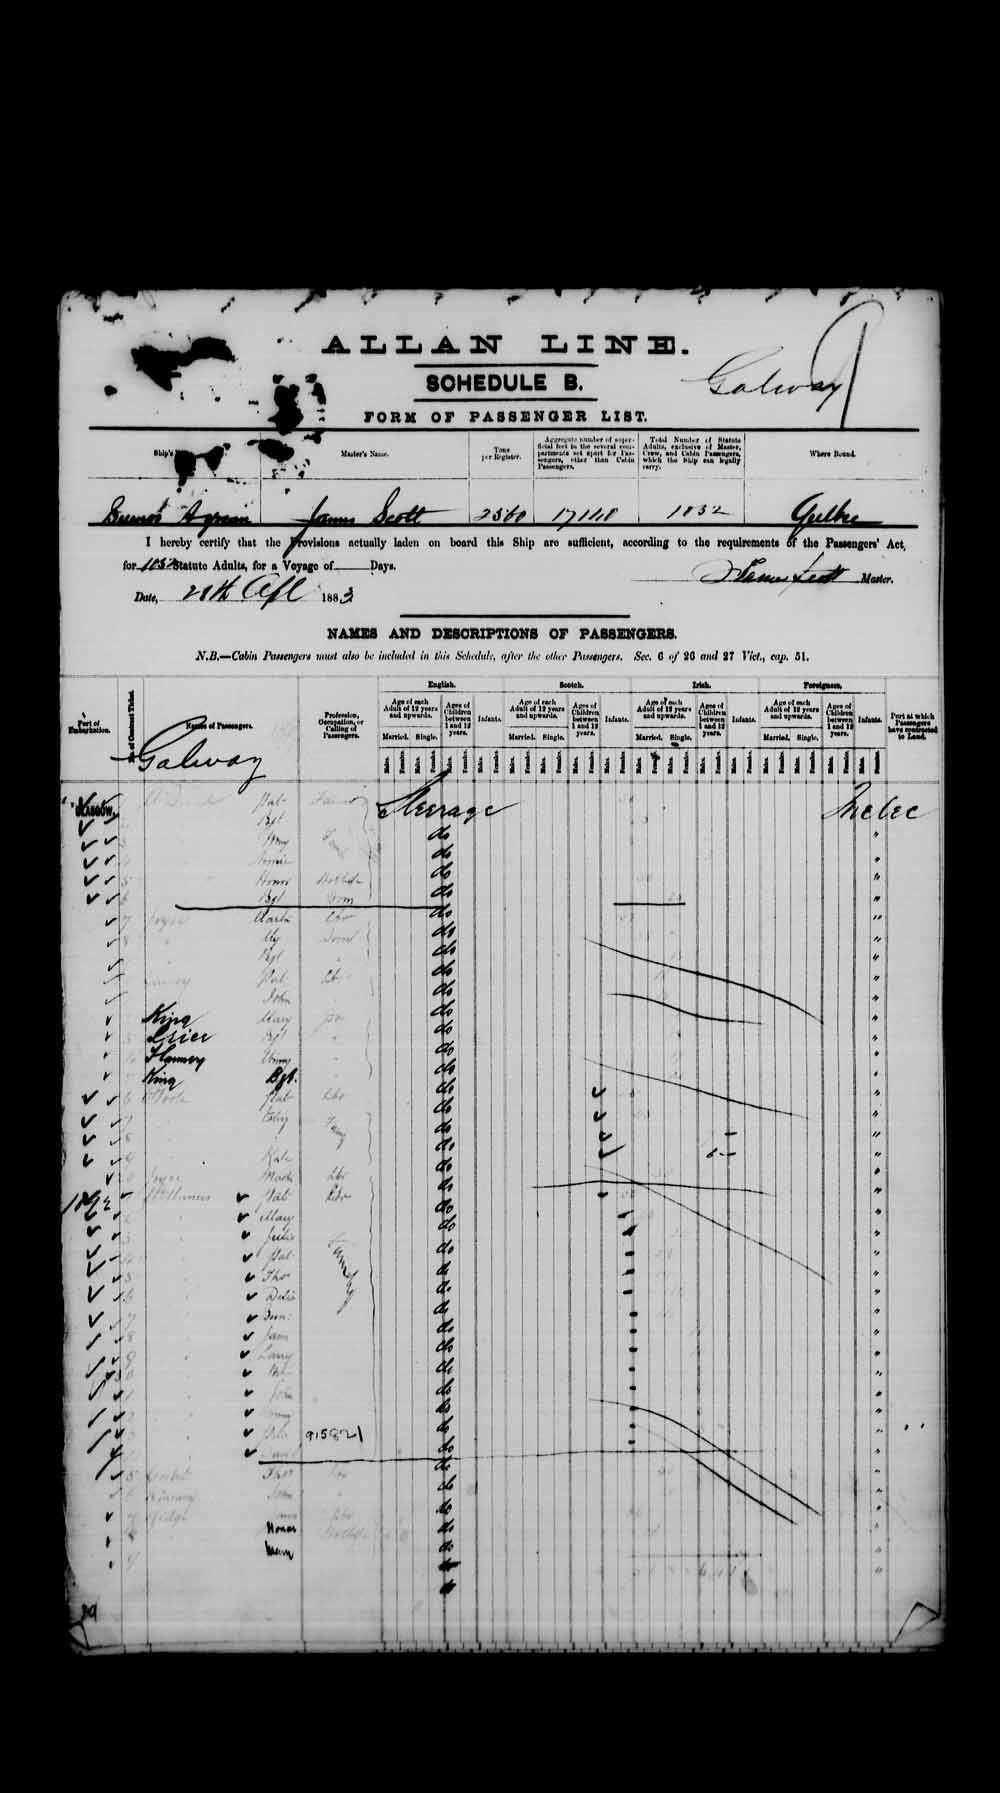 Digitized page of Passenger Lists for Image No.: e003542783